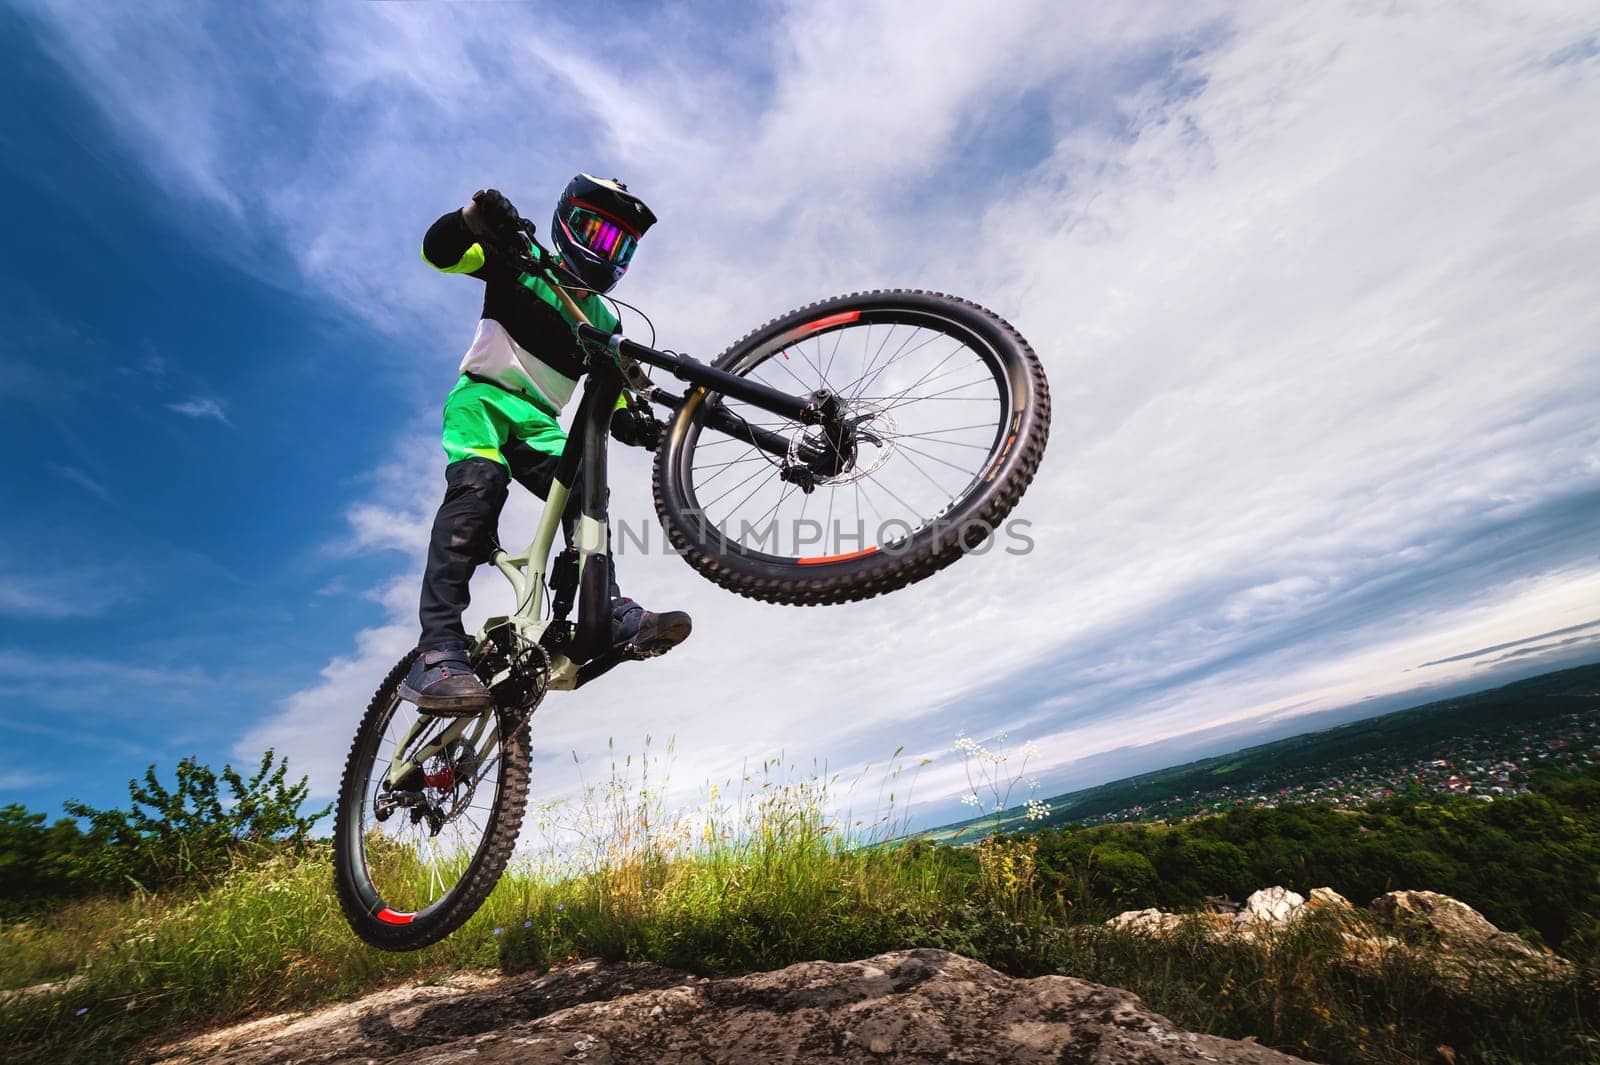 A professional racer jumps on a bicycle against a blue cloudy sky. Sunny summer day. Low angle view of a man on a mountain bike jumping in the mountains